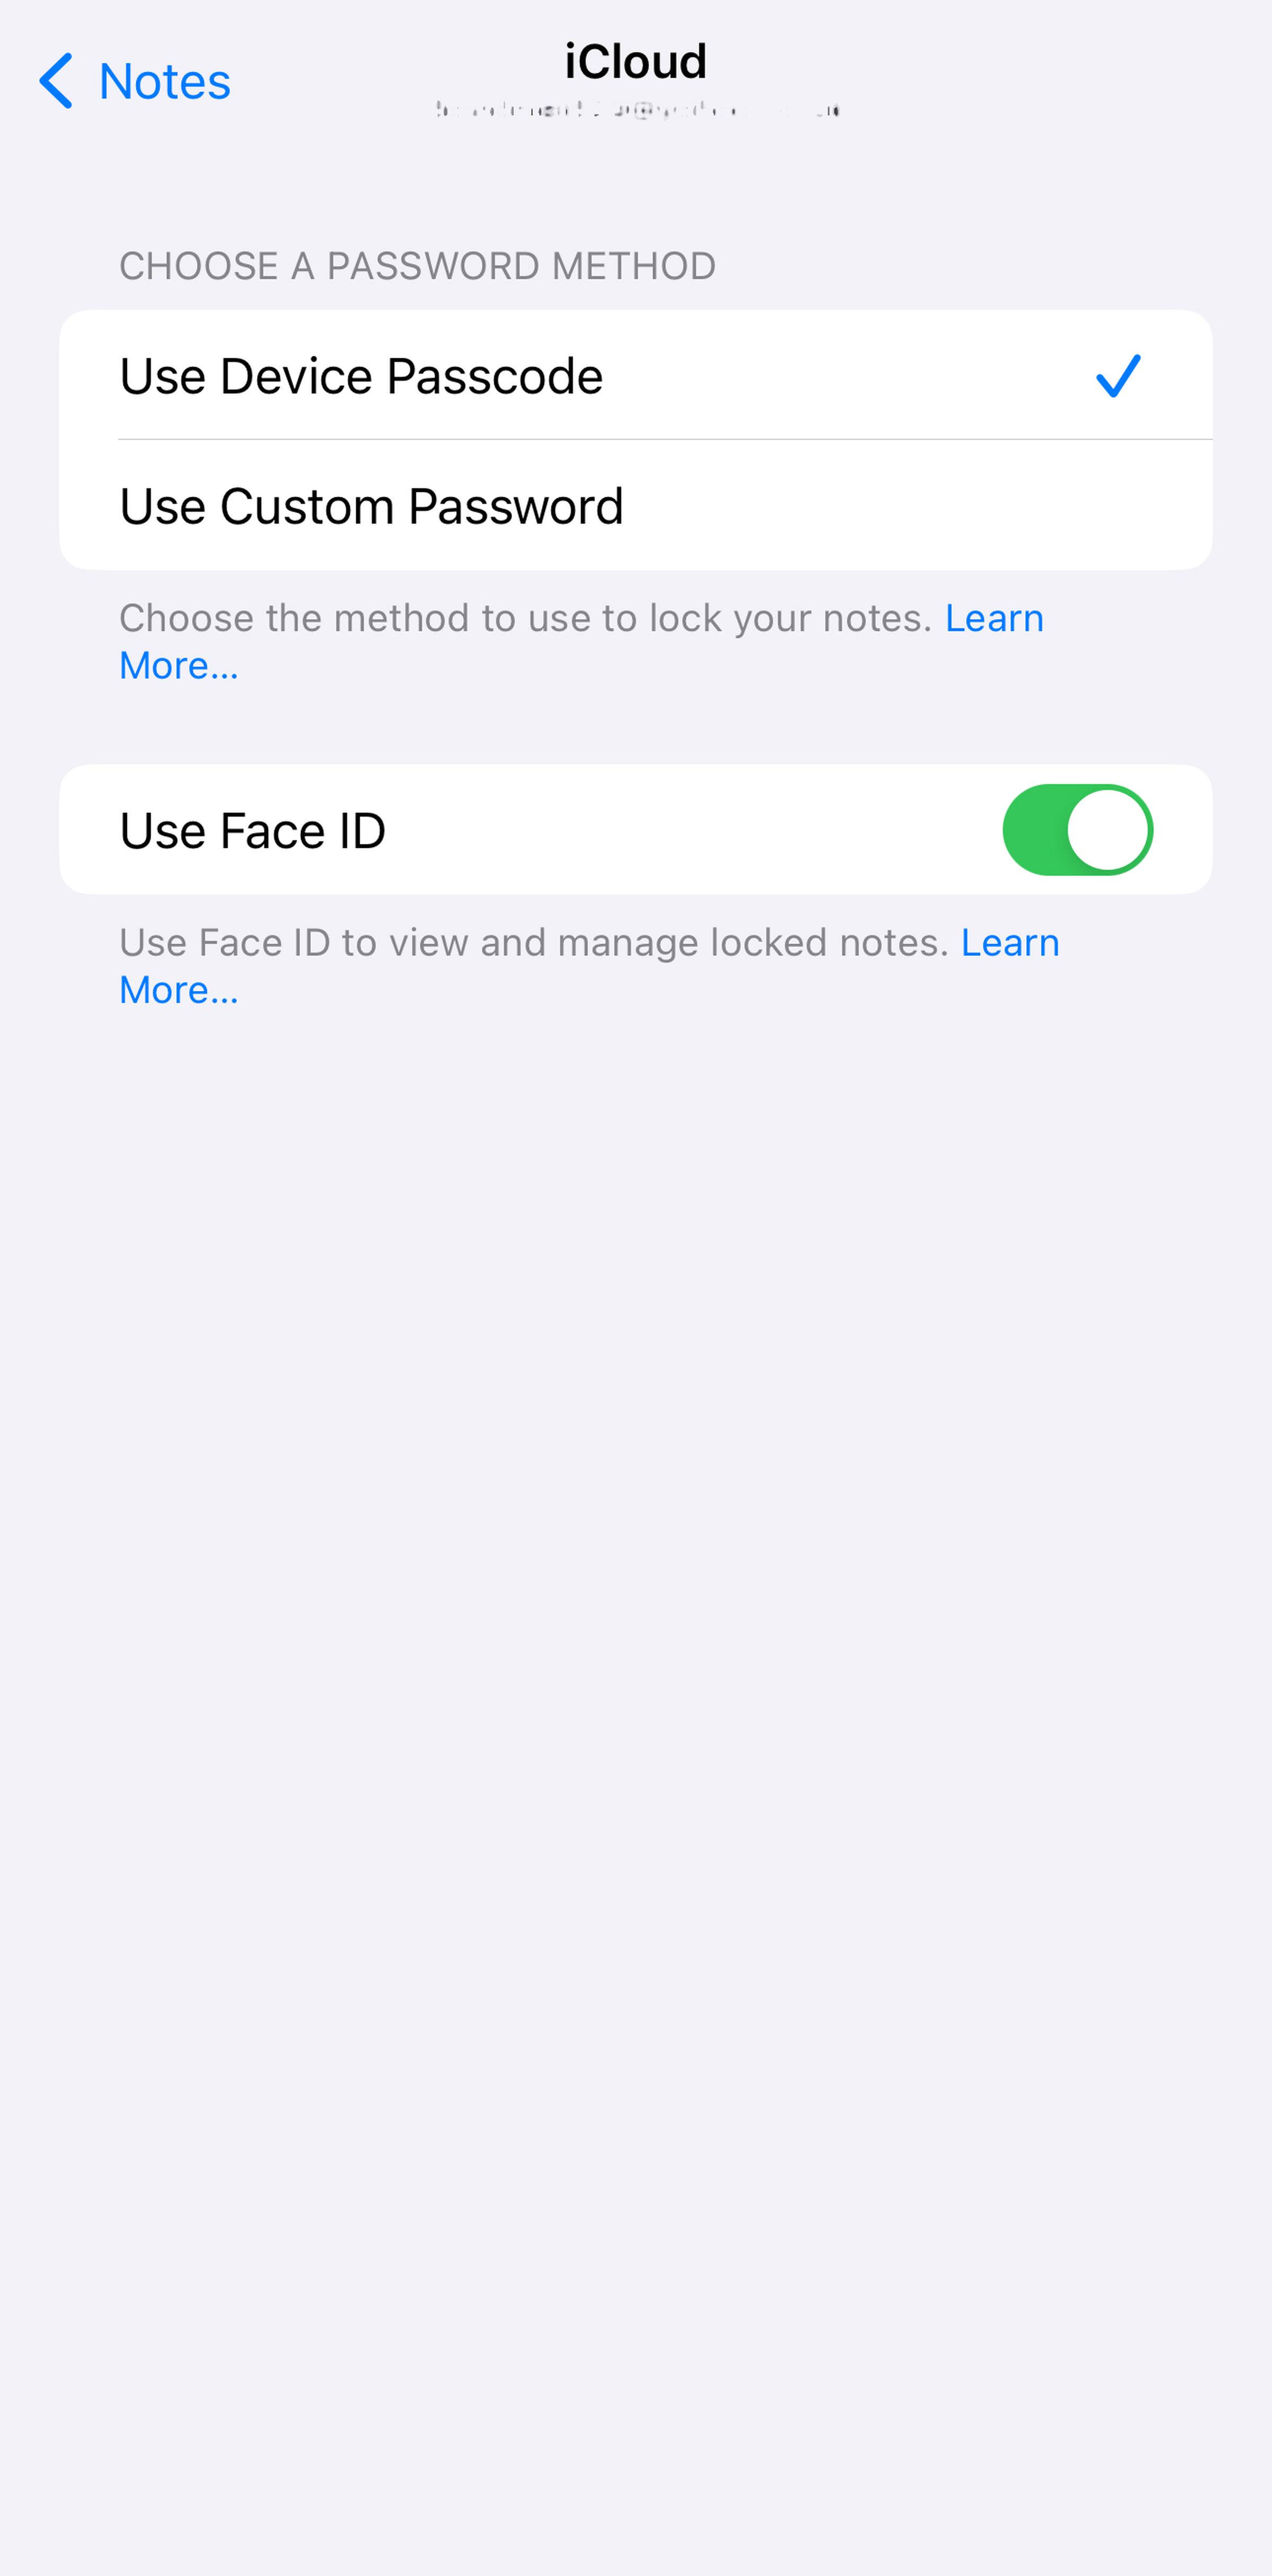 Three selections: Use Device Passcode, Use Custom Password, Use Face ID